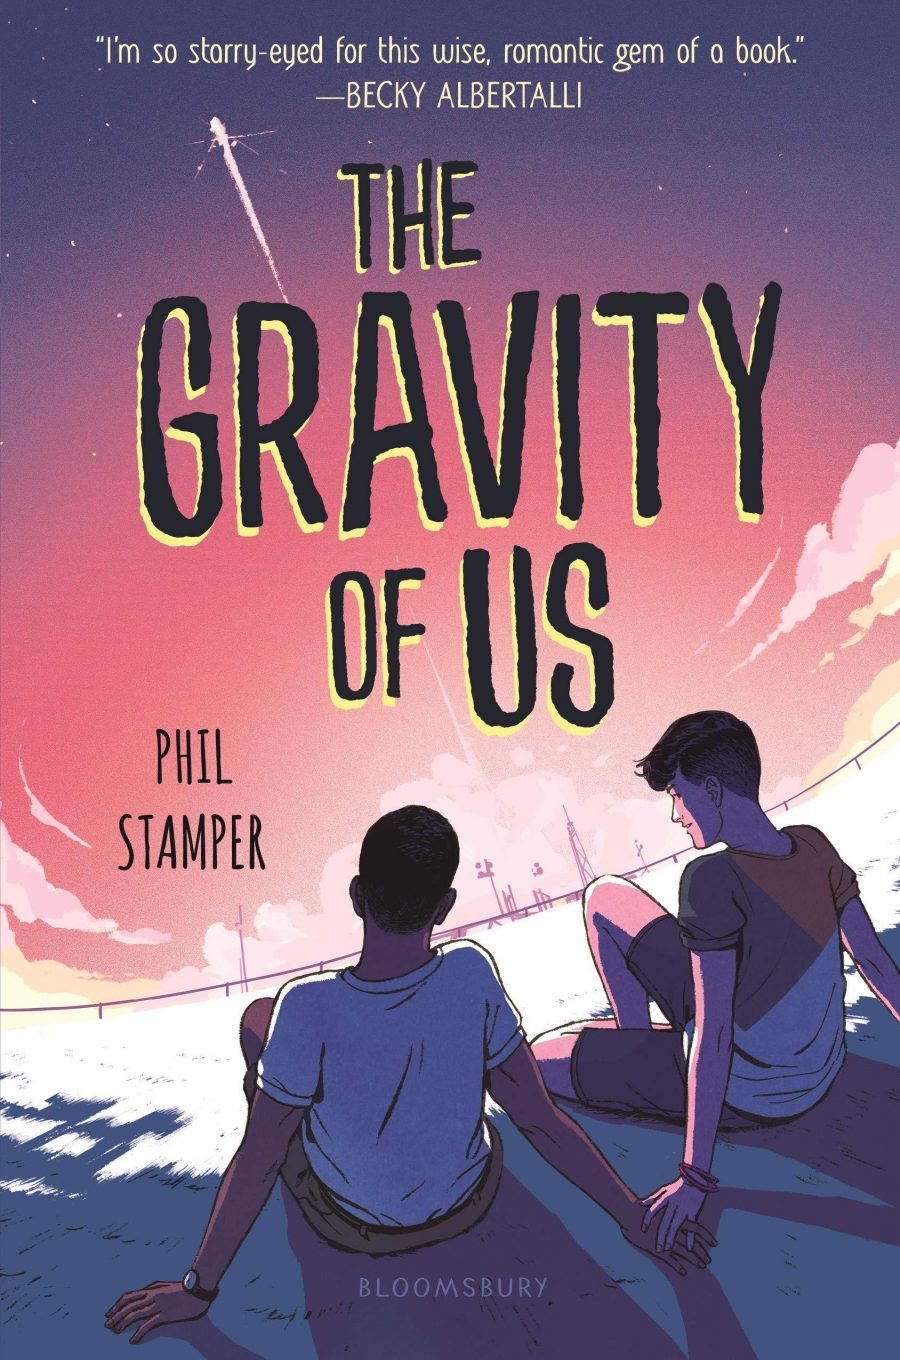 Book cover for 'The Gravity of Us' by Phil Stamper. Two young adults are sitting looking out into the sunset over buildings, their hands are touching. A shooting star races through the sky.